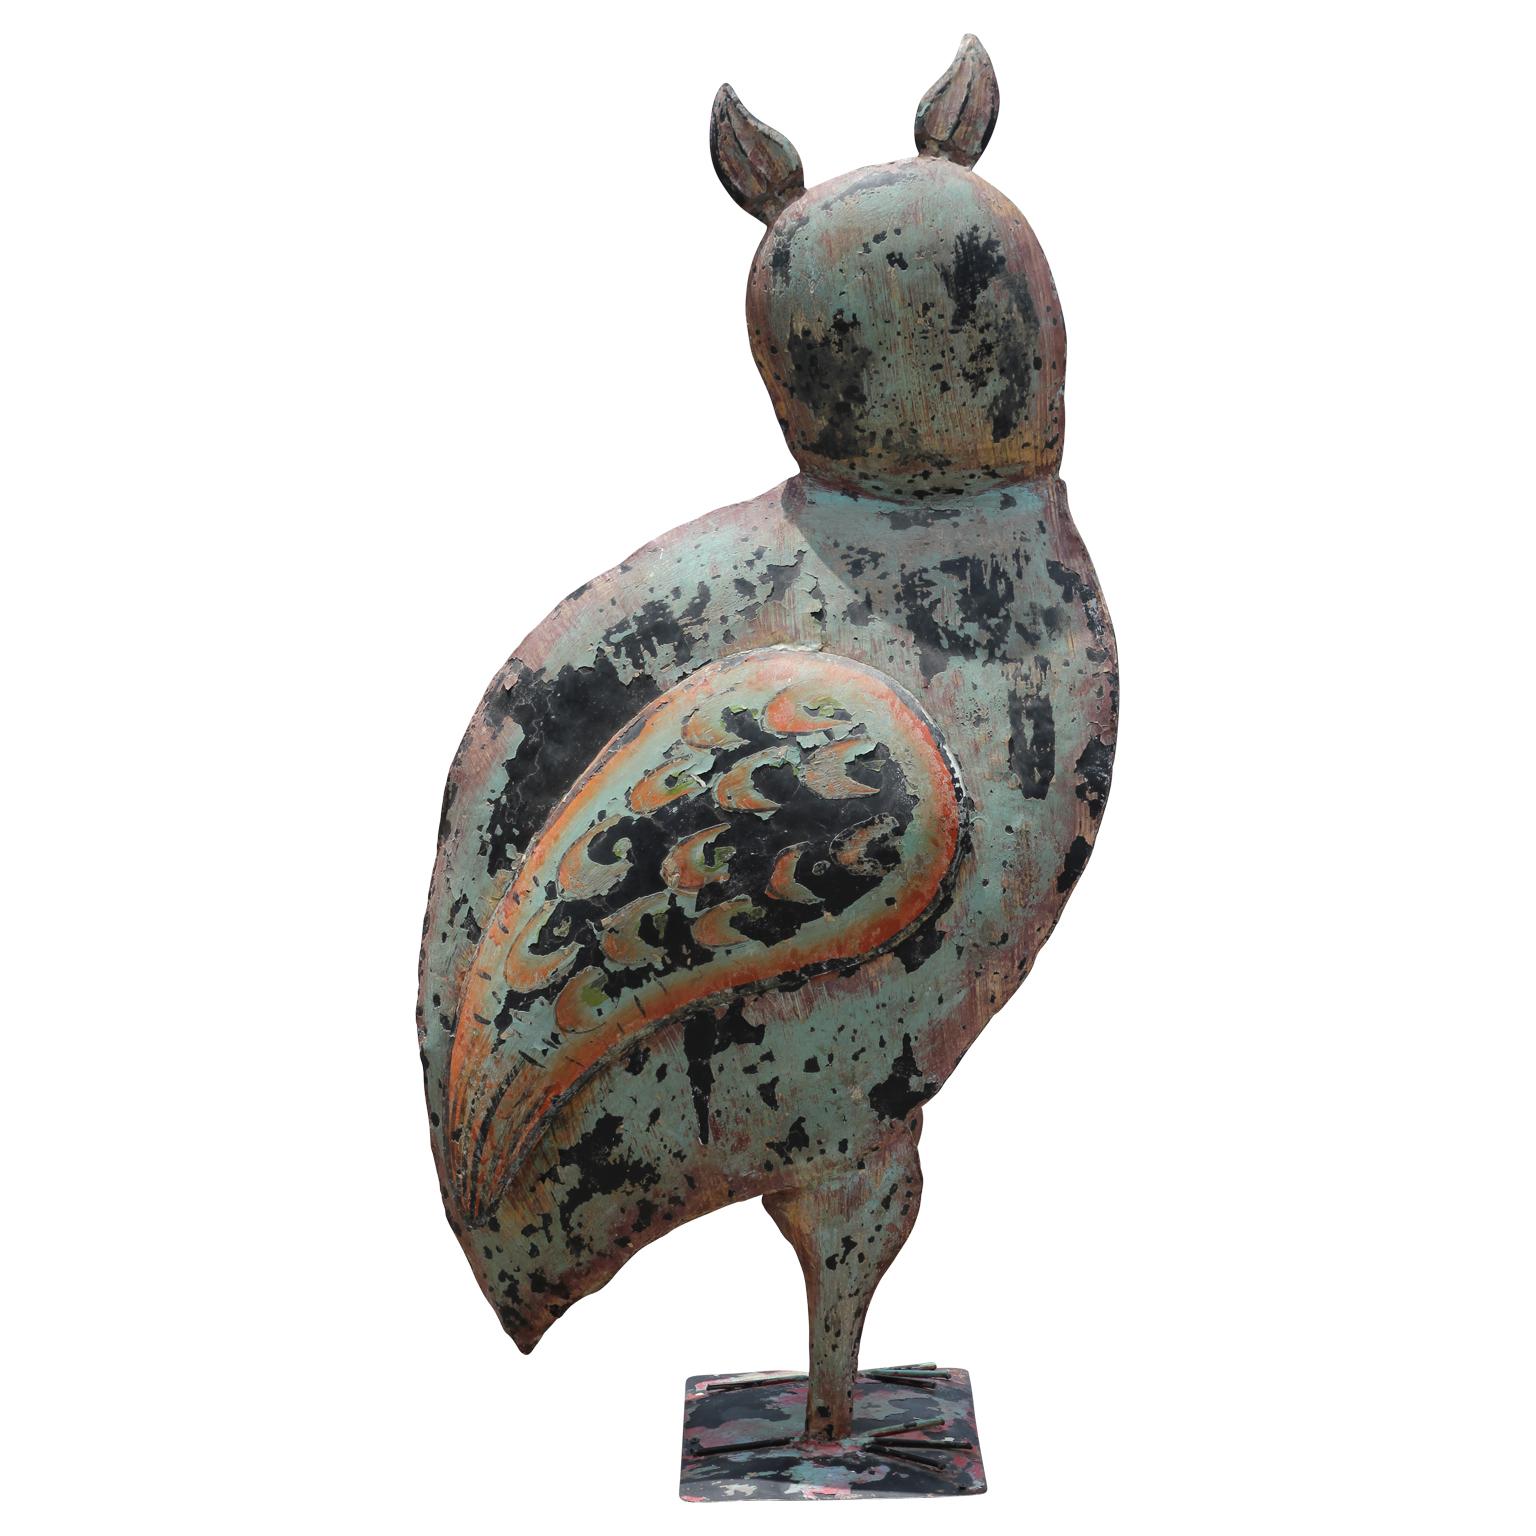 Massive Rustic Folk Art Painted Patina Tin Owl Sculpture with Wooden Base 1